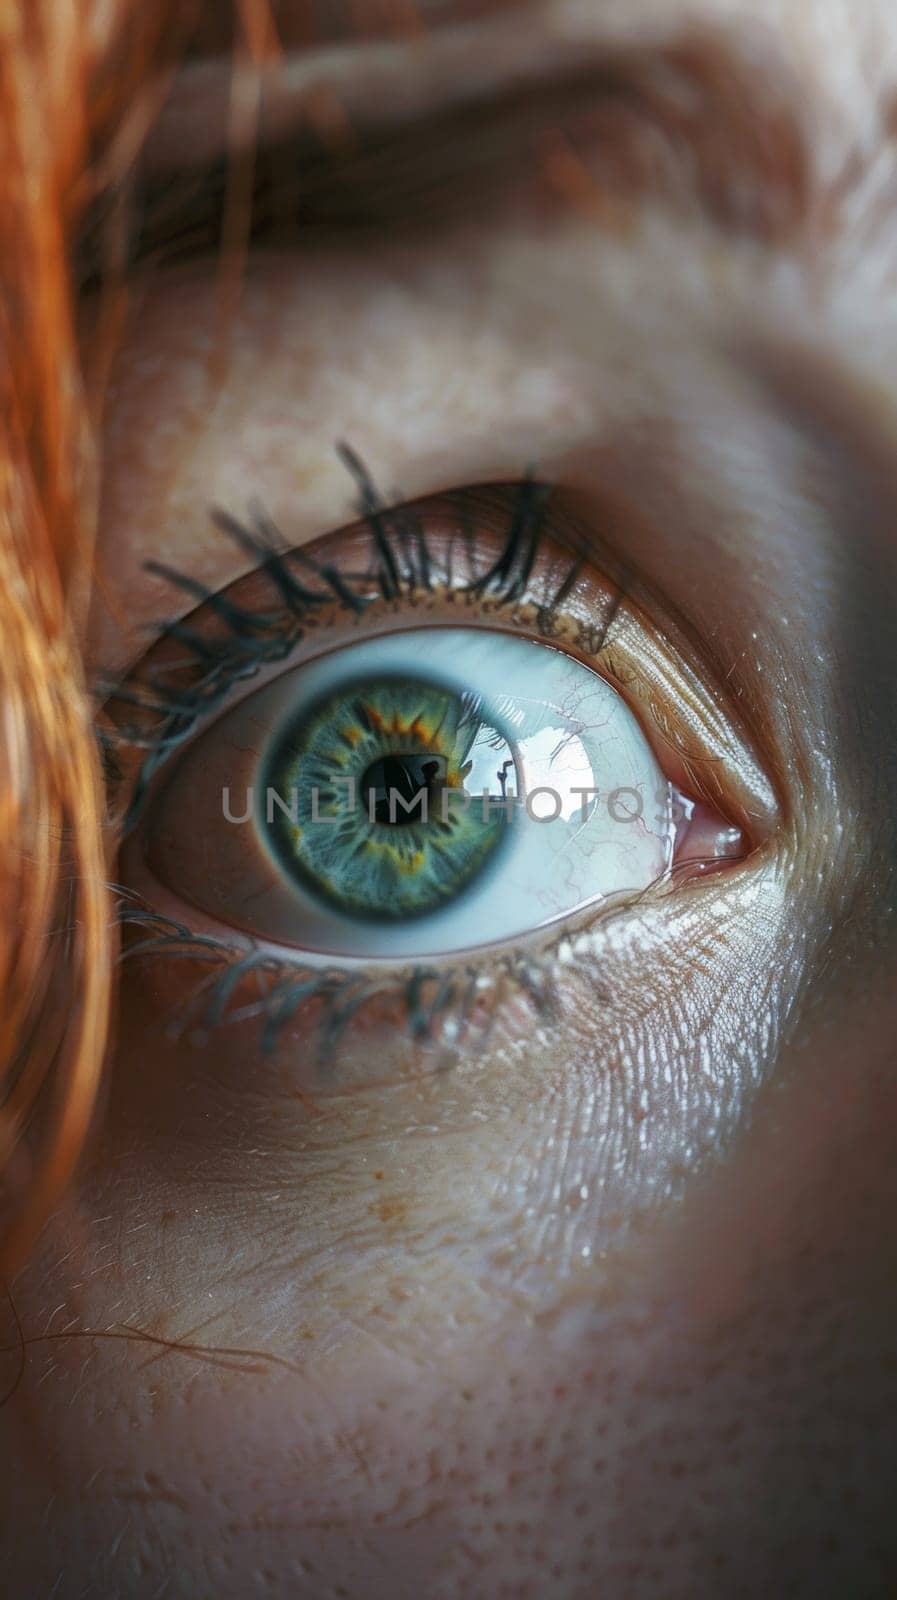 A close up of a woman's eye with red hair and blue eyes